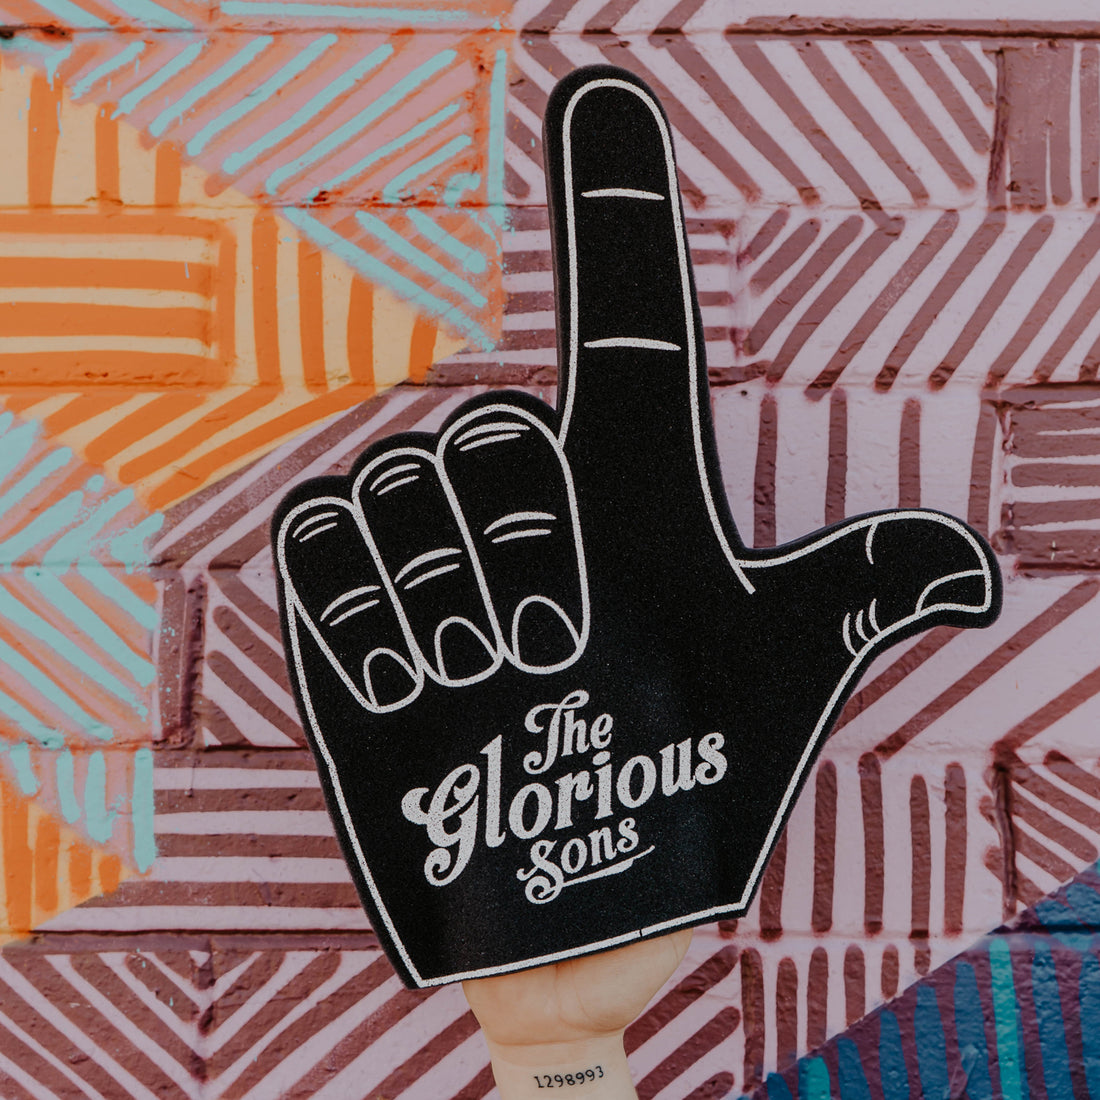 The Glorious Sons - Foam Hands